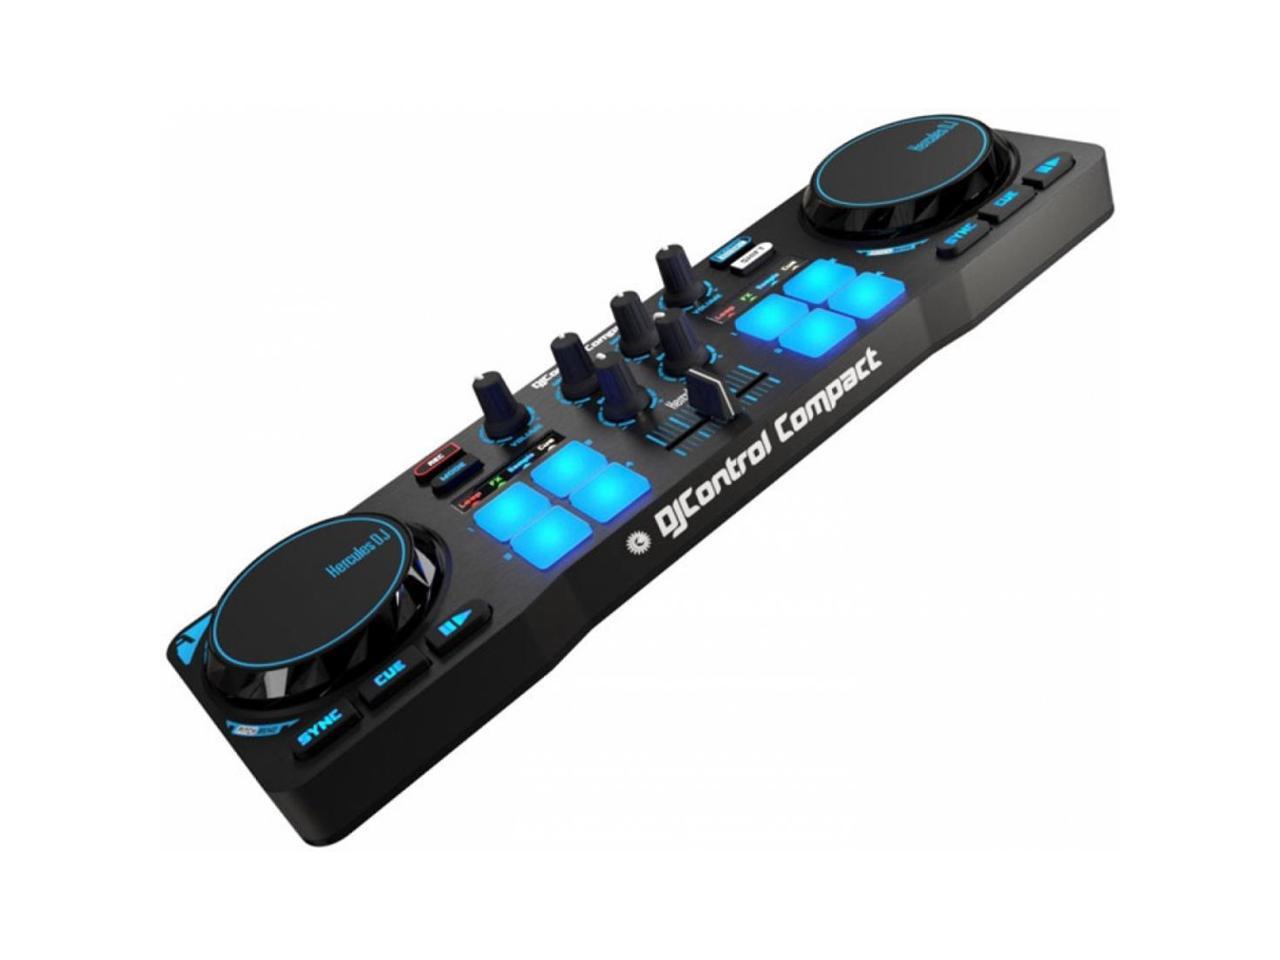 Hercules 4780843 Djcontrol Compact Super Mobile Usb Controller With 8 Trigger Pads And 2 Virtual Turntable Decks Newegg Com